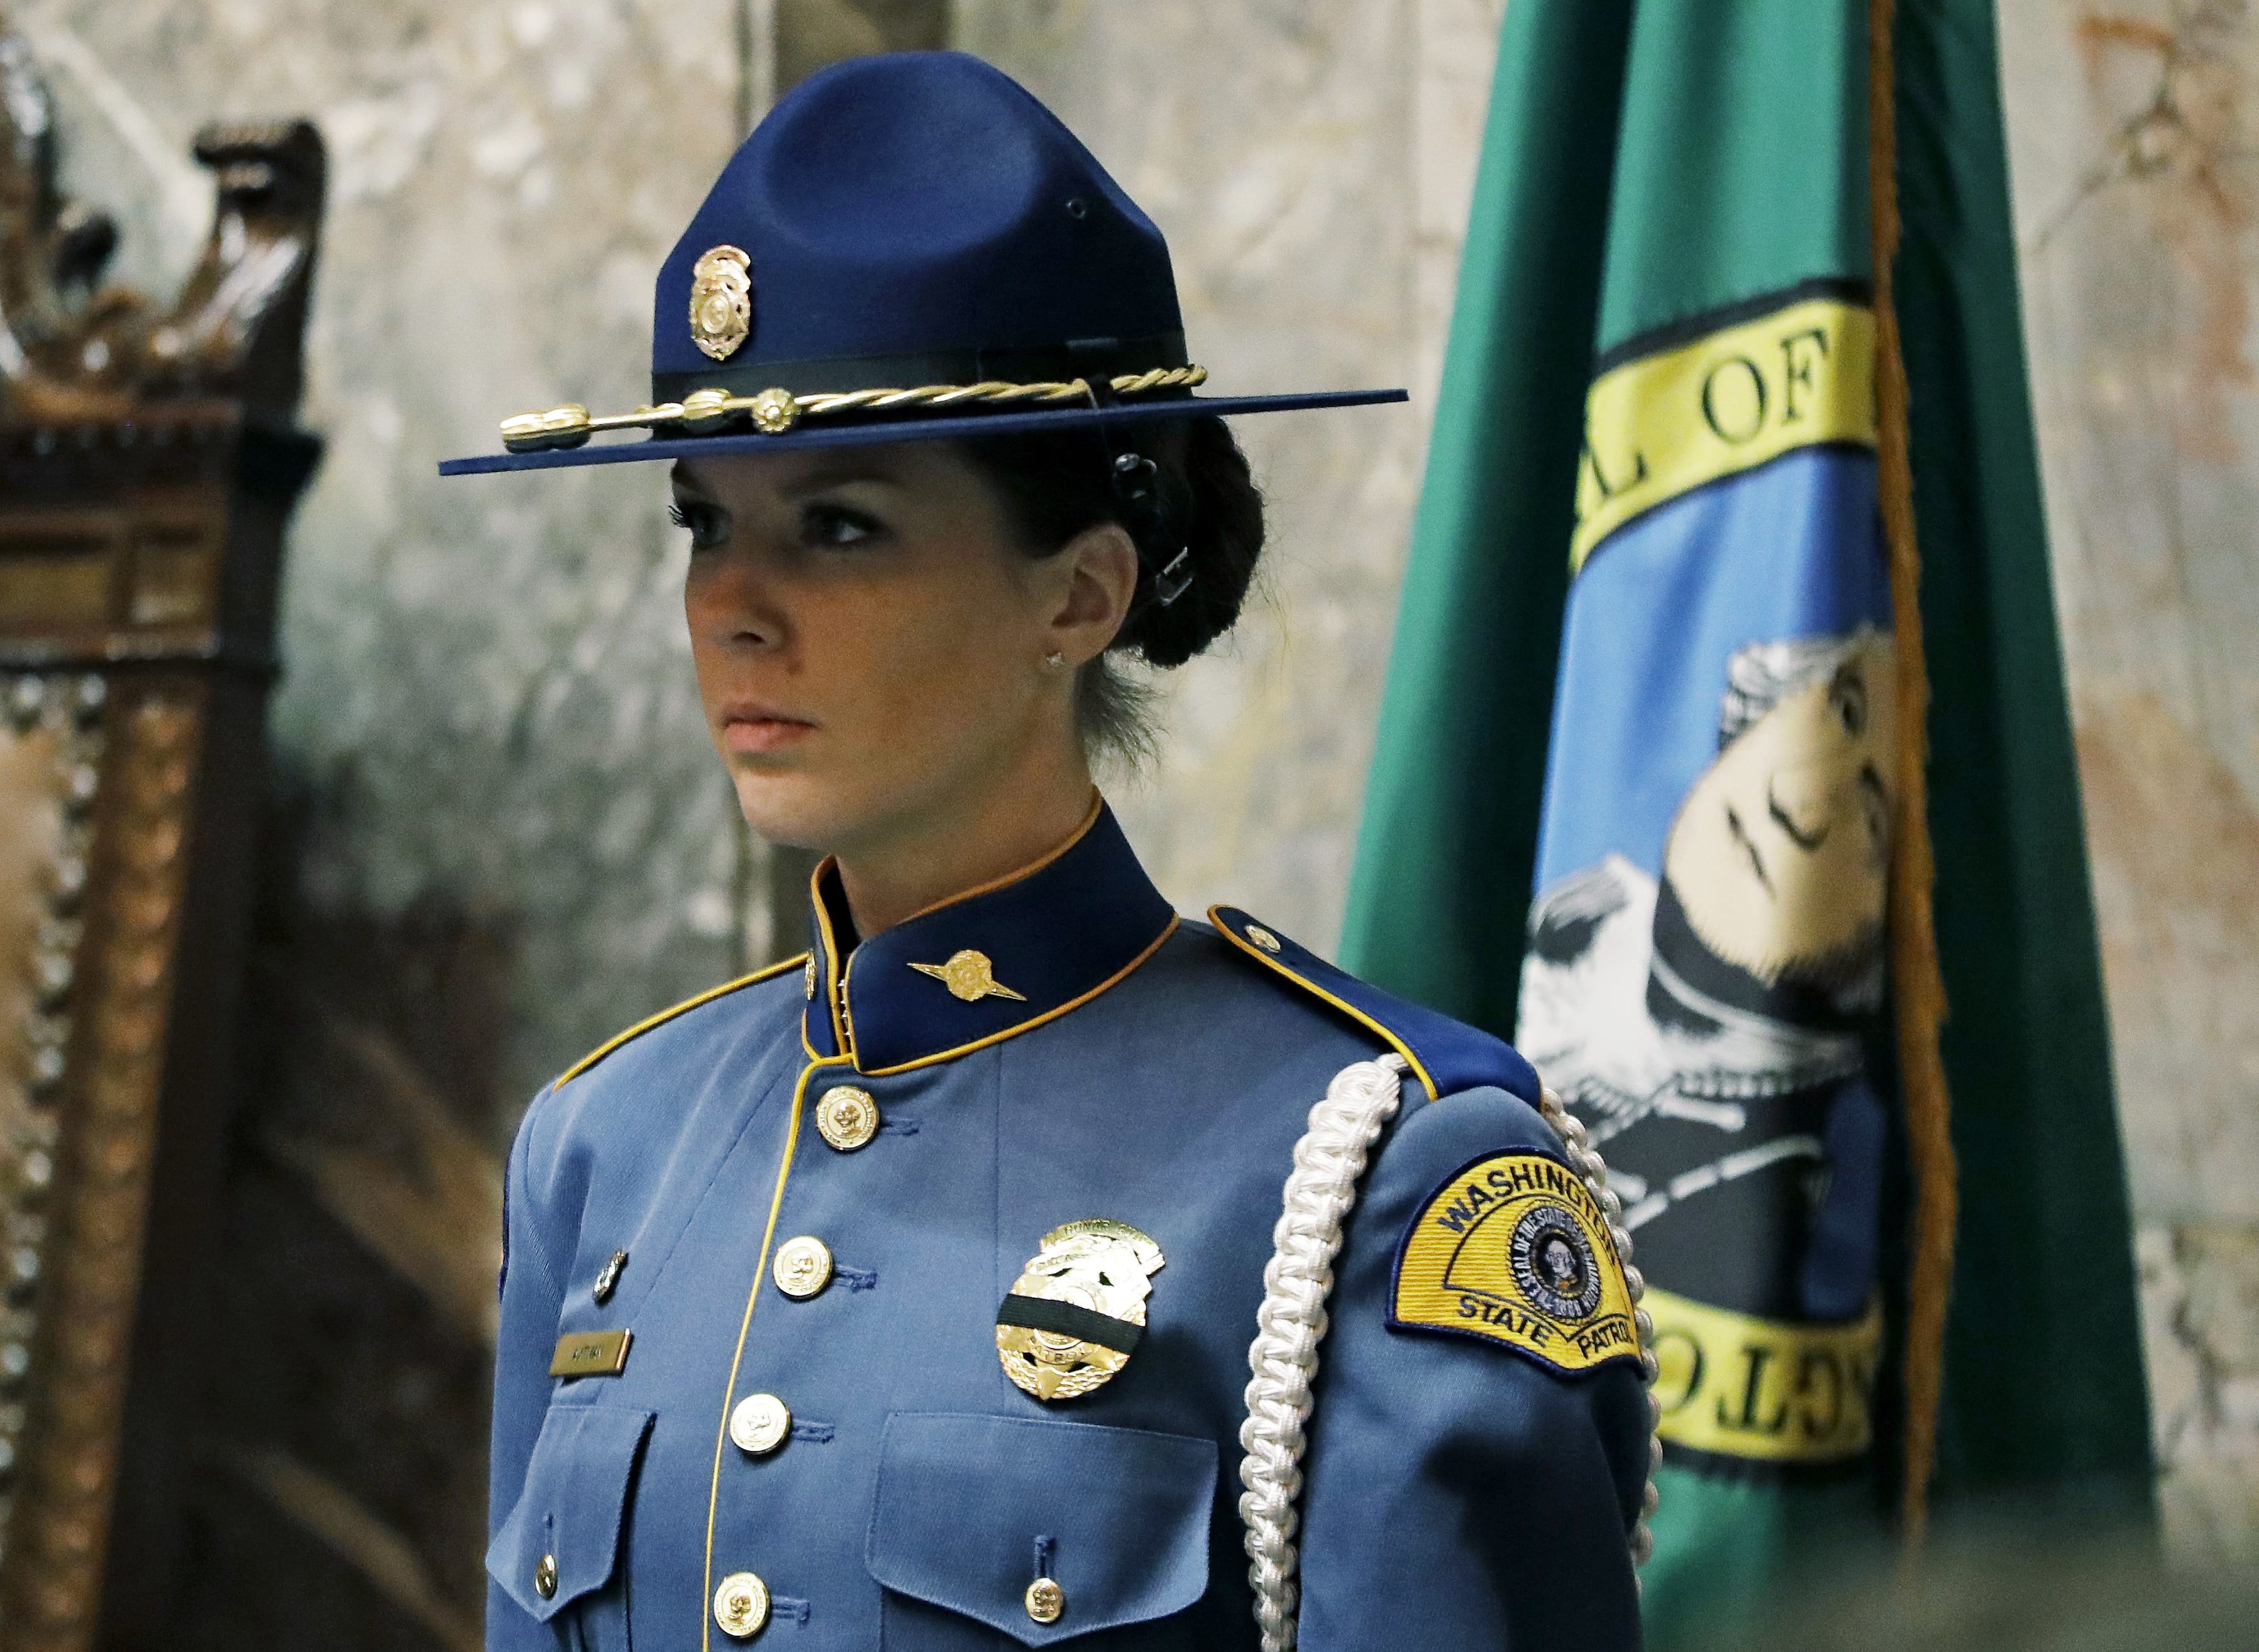 A Washington State Patrol trooper wears a black band across her badge, Monday, Jan. 8, 2018 to honor Pierce County Sheriff's Deputy Daniel McCartney, who was shot during a foot chase late Sunday night as he responded to a home invasion in Frederickson, Wash., and who died of his wounds later that night. The trooper was taking part in an honor guard ceremony Monday to open the first day of the 2018 legislative session. (AP Photo/Ted S.